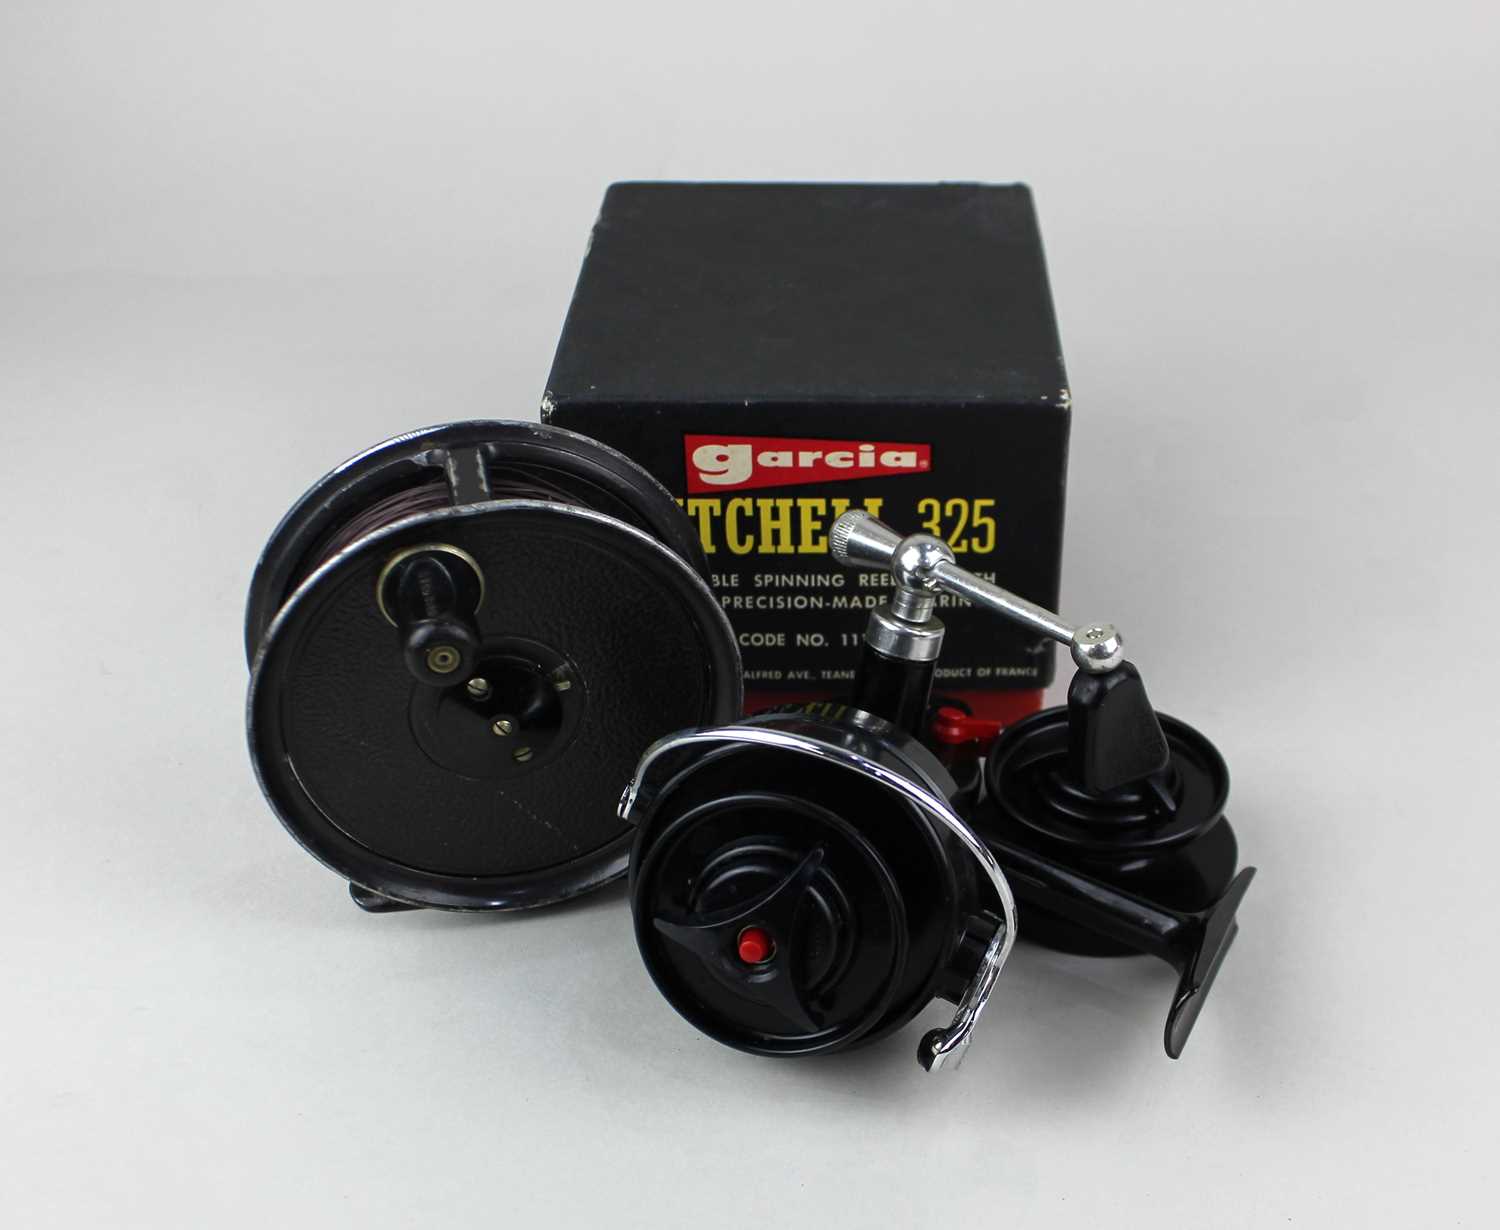 A Garcia Mitchell 325 spinning fishing reel, boxed and a Pridex reel